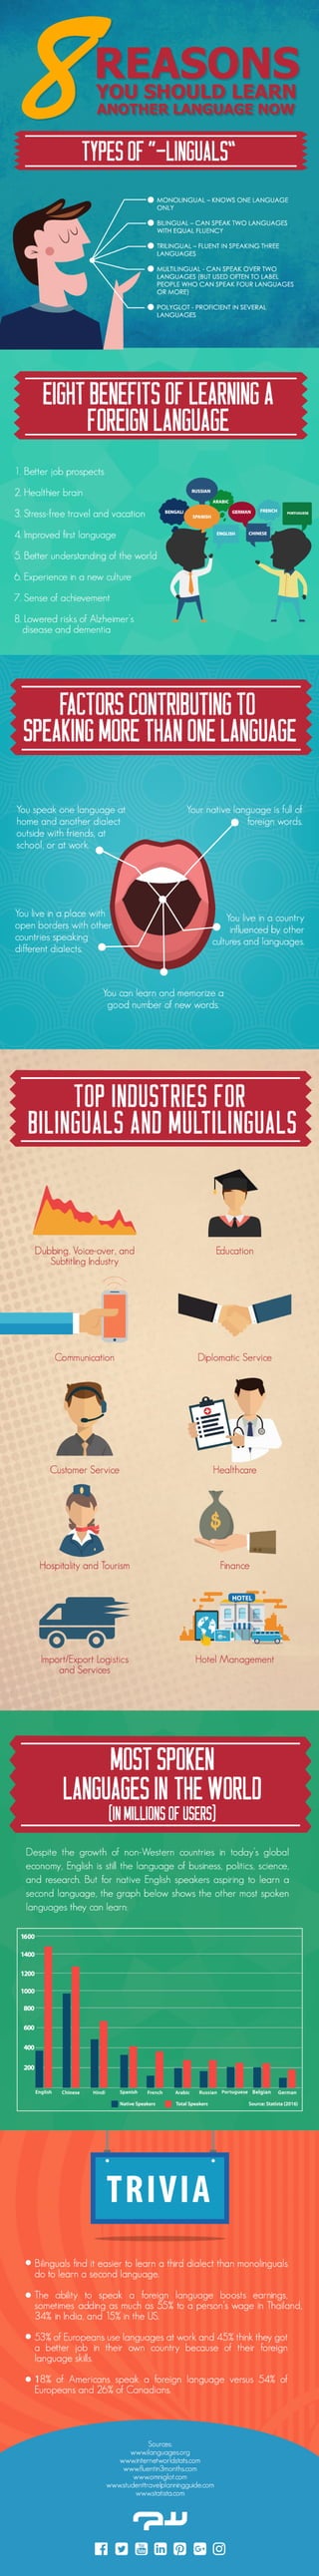 Eight Big Advantages of Learning a Foreign Language [Infographic]